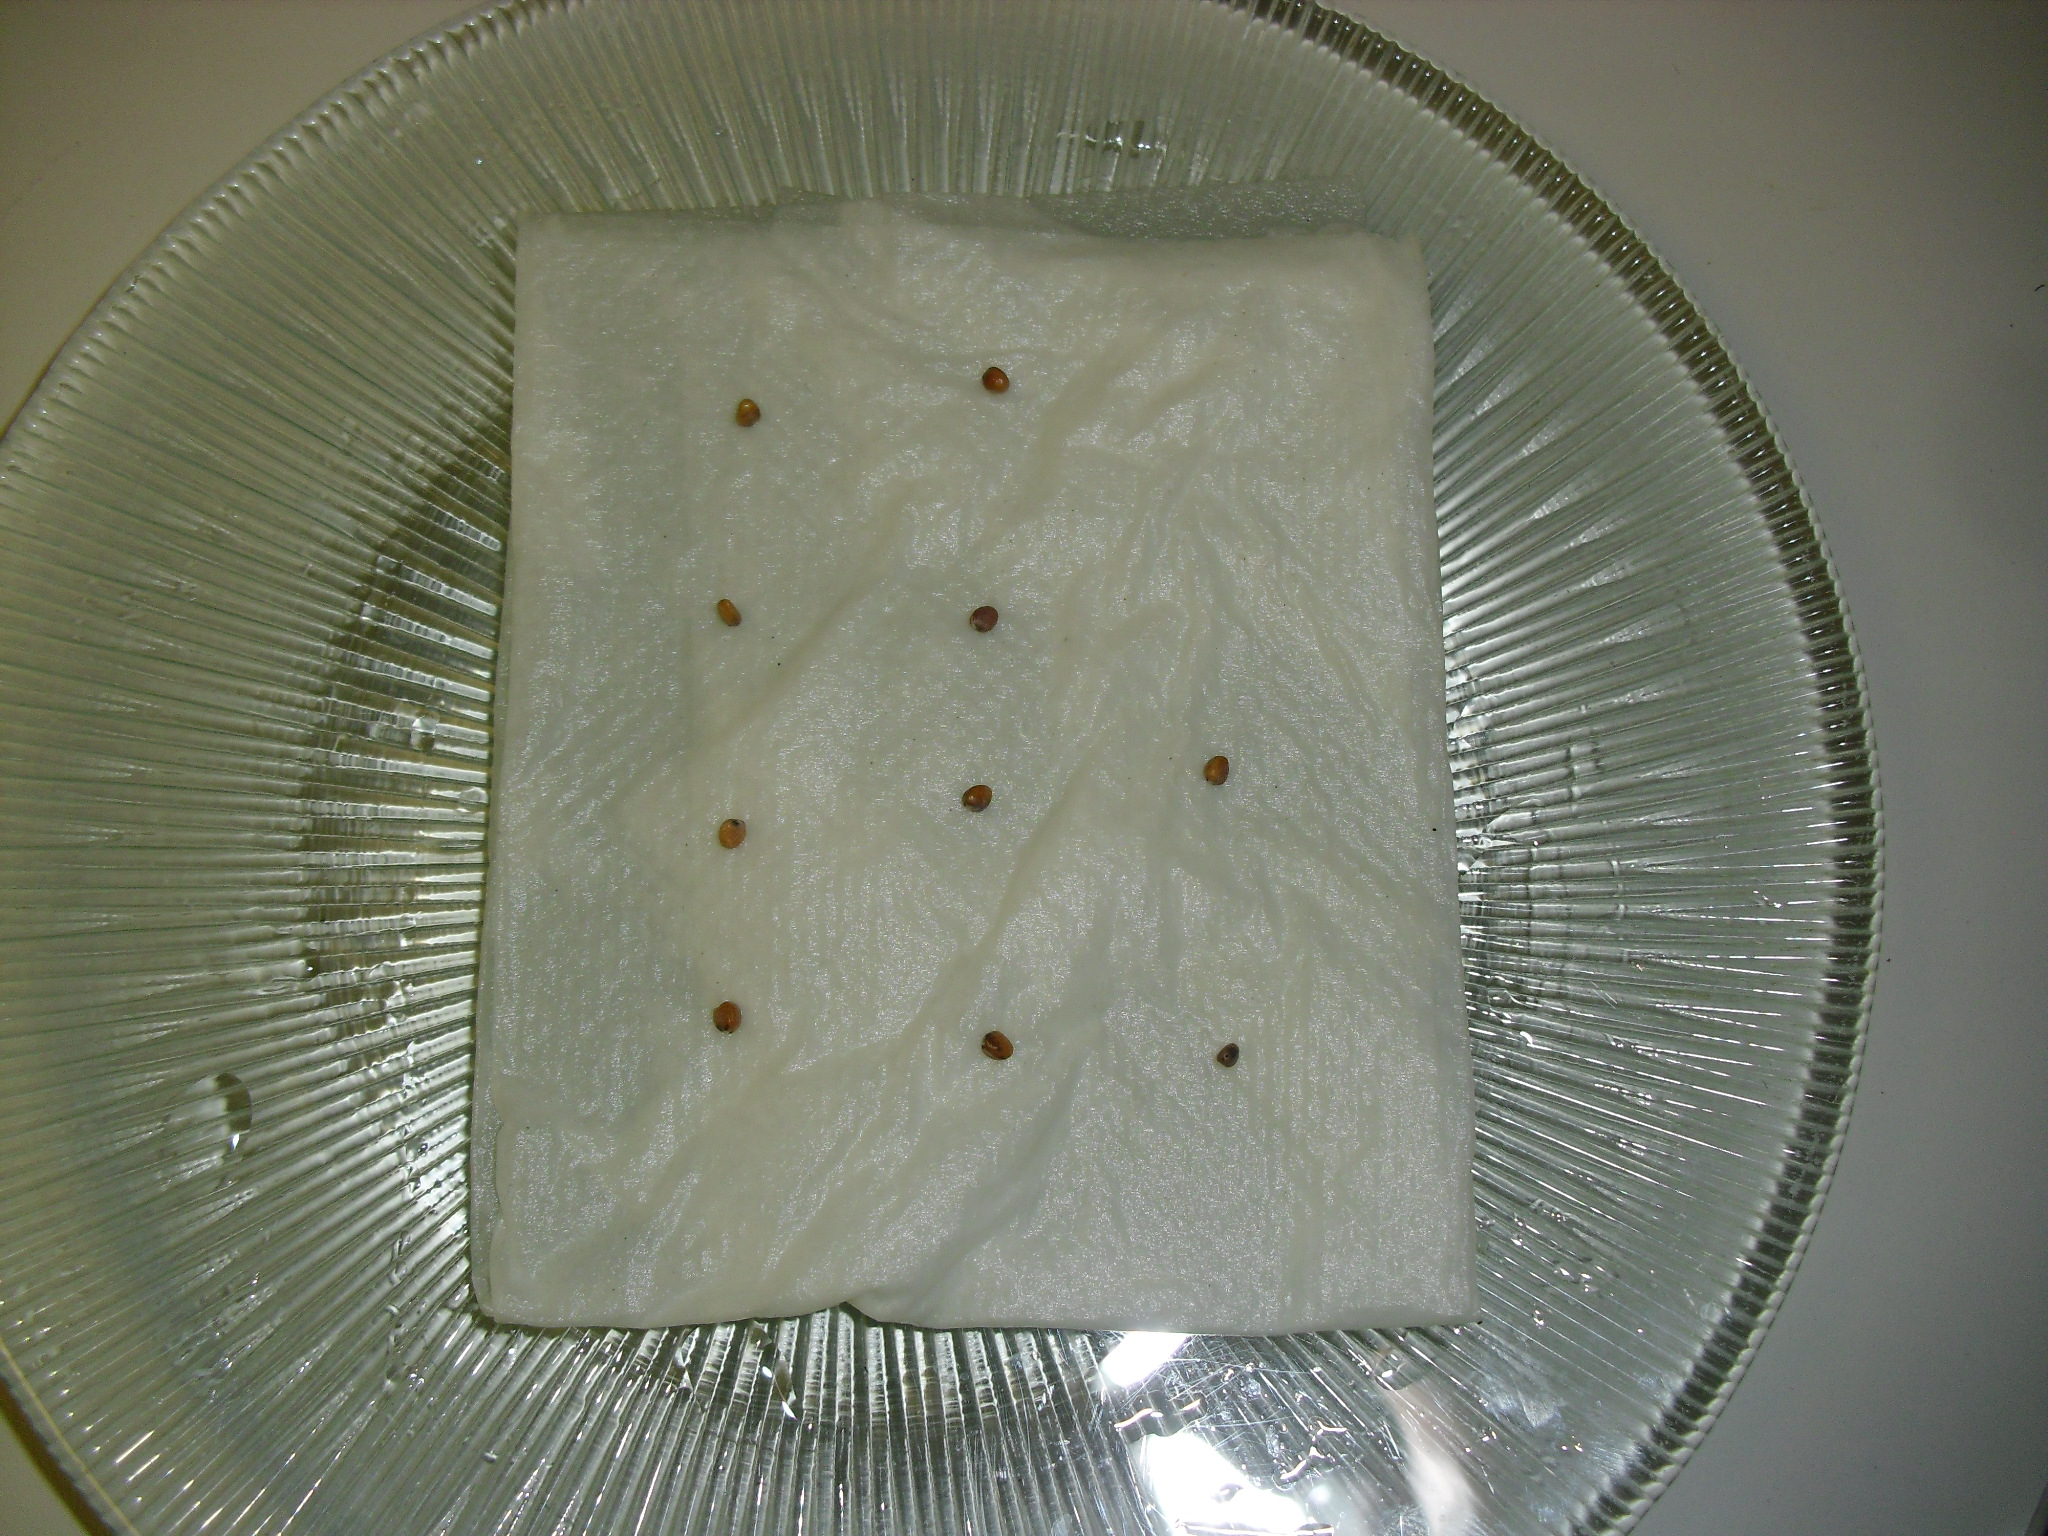 PHOTO: ten radish seeds are arranged in three rows, half inch apart, on a wet folded paper towel.